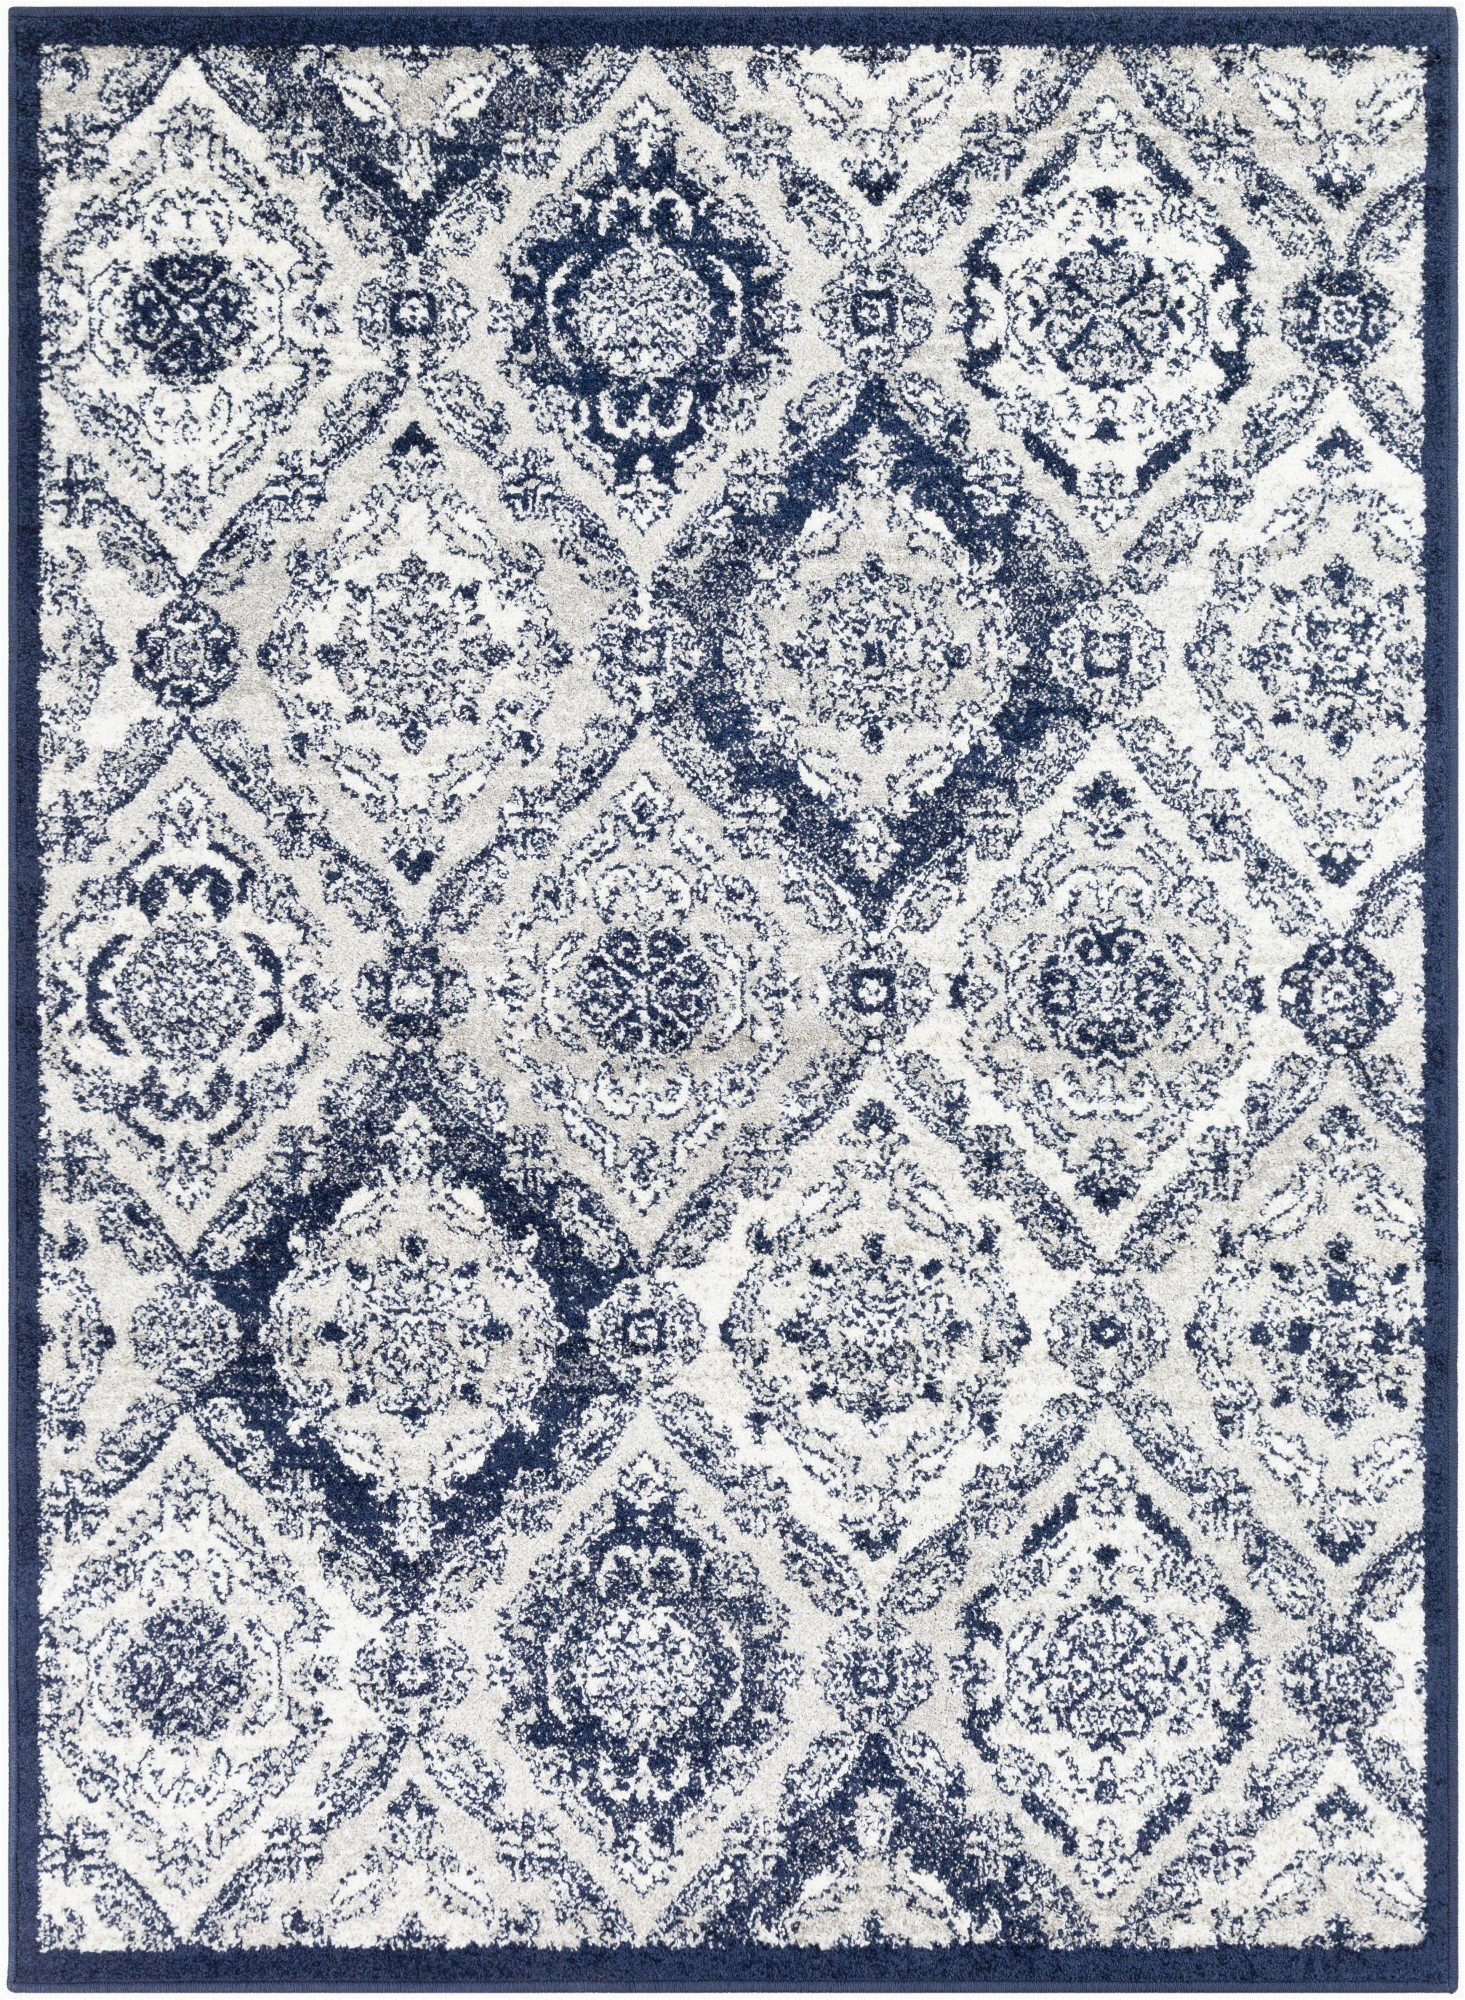 Grey White and Blue Rug Surya Seville Sev 2304 area Rugs